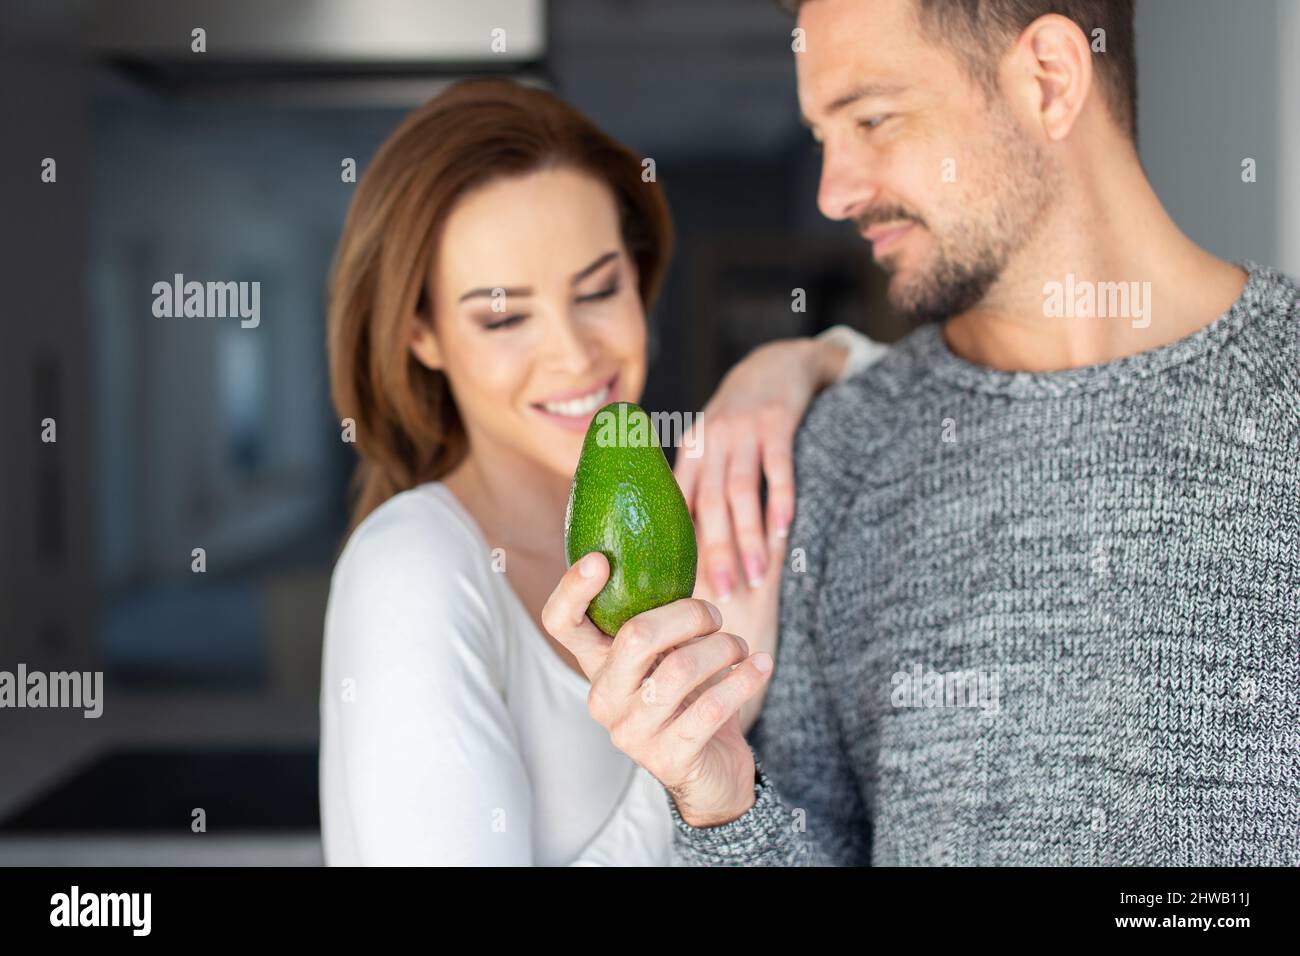 Young Caucasian man offering avocado to woman indoors, depth of field Stock Photo